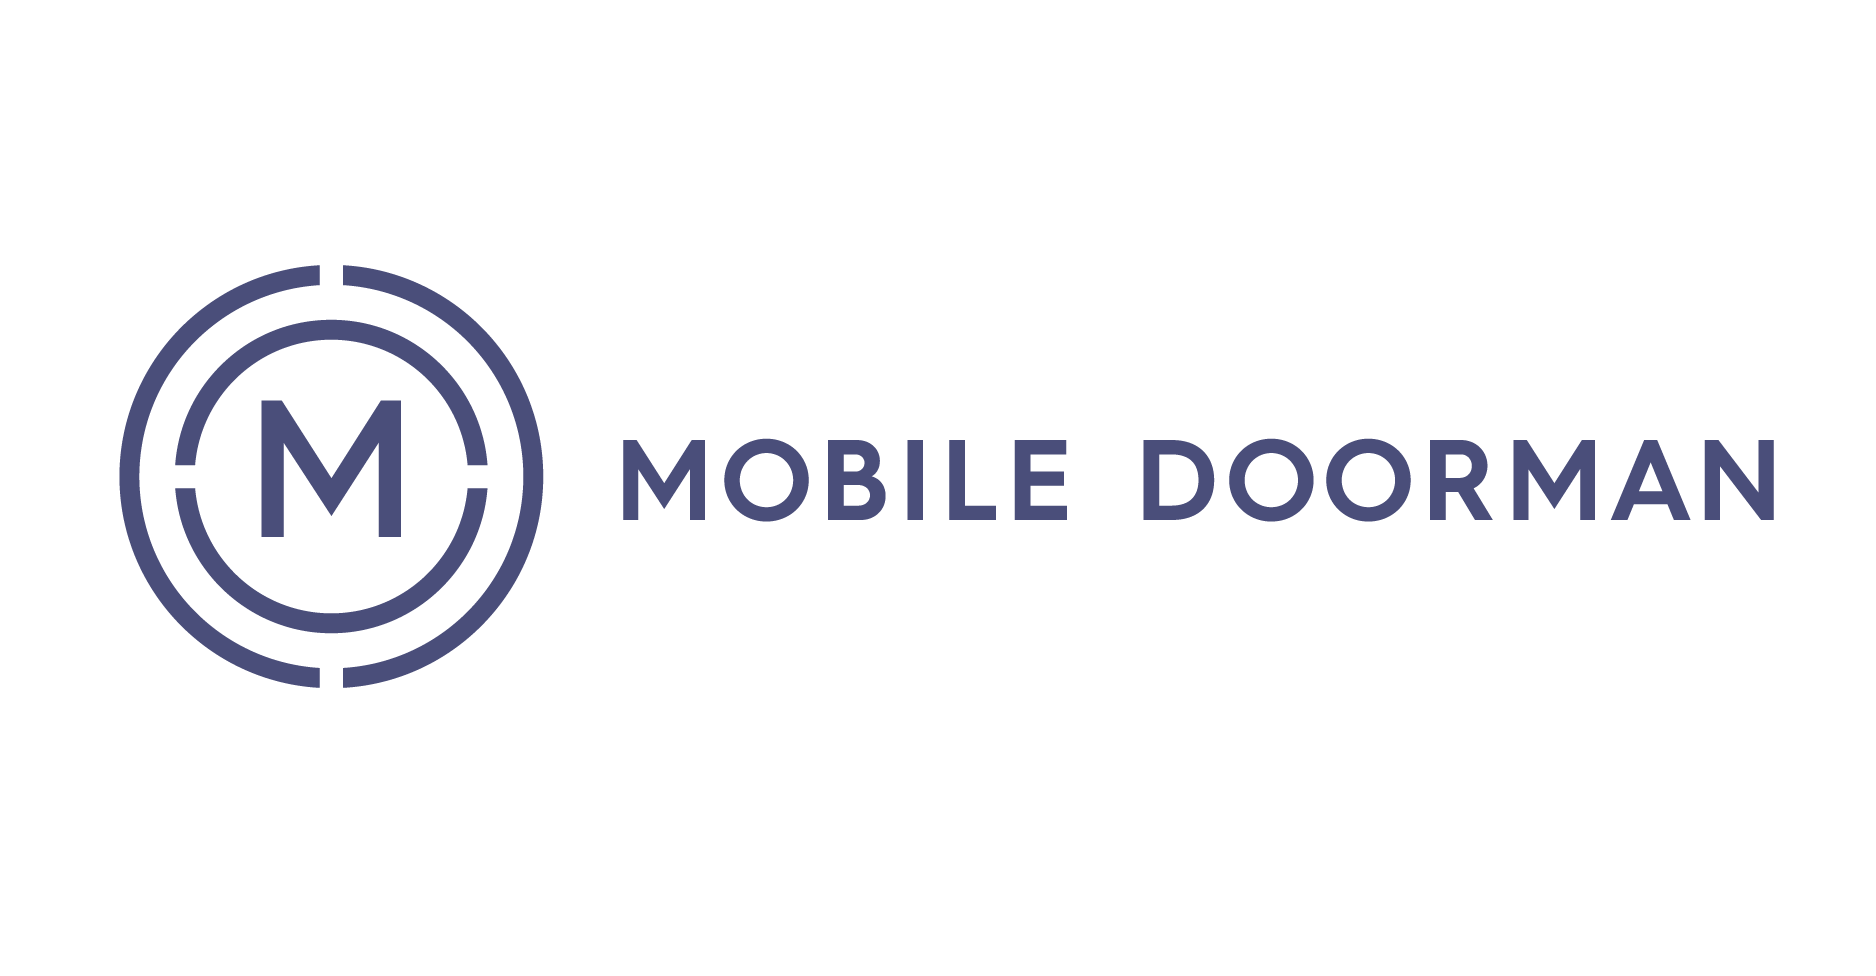 Mobile Doorman is the industry-leading creator of custom-branded apartment apps for multifamily communities across the United States.